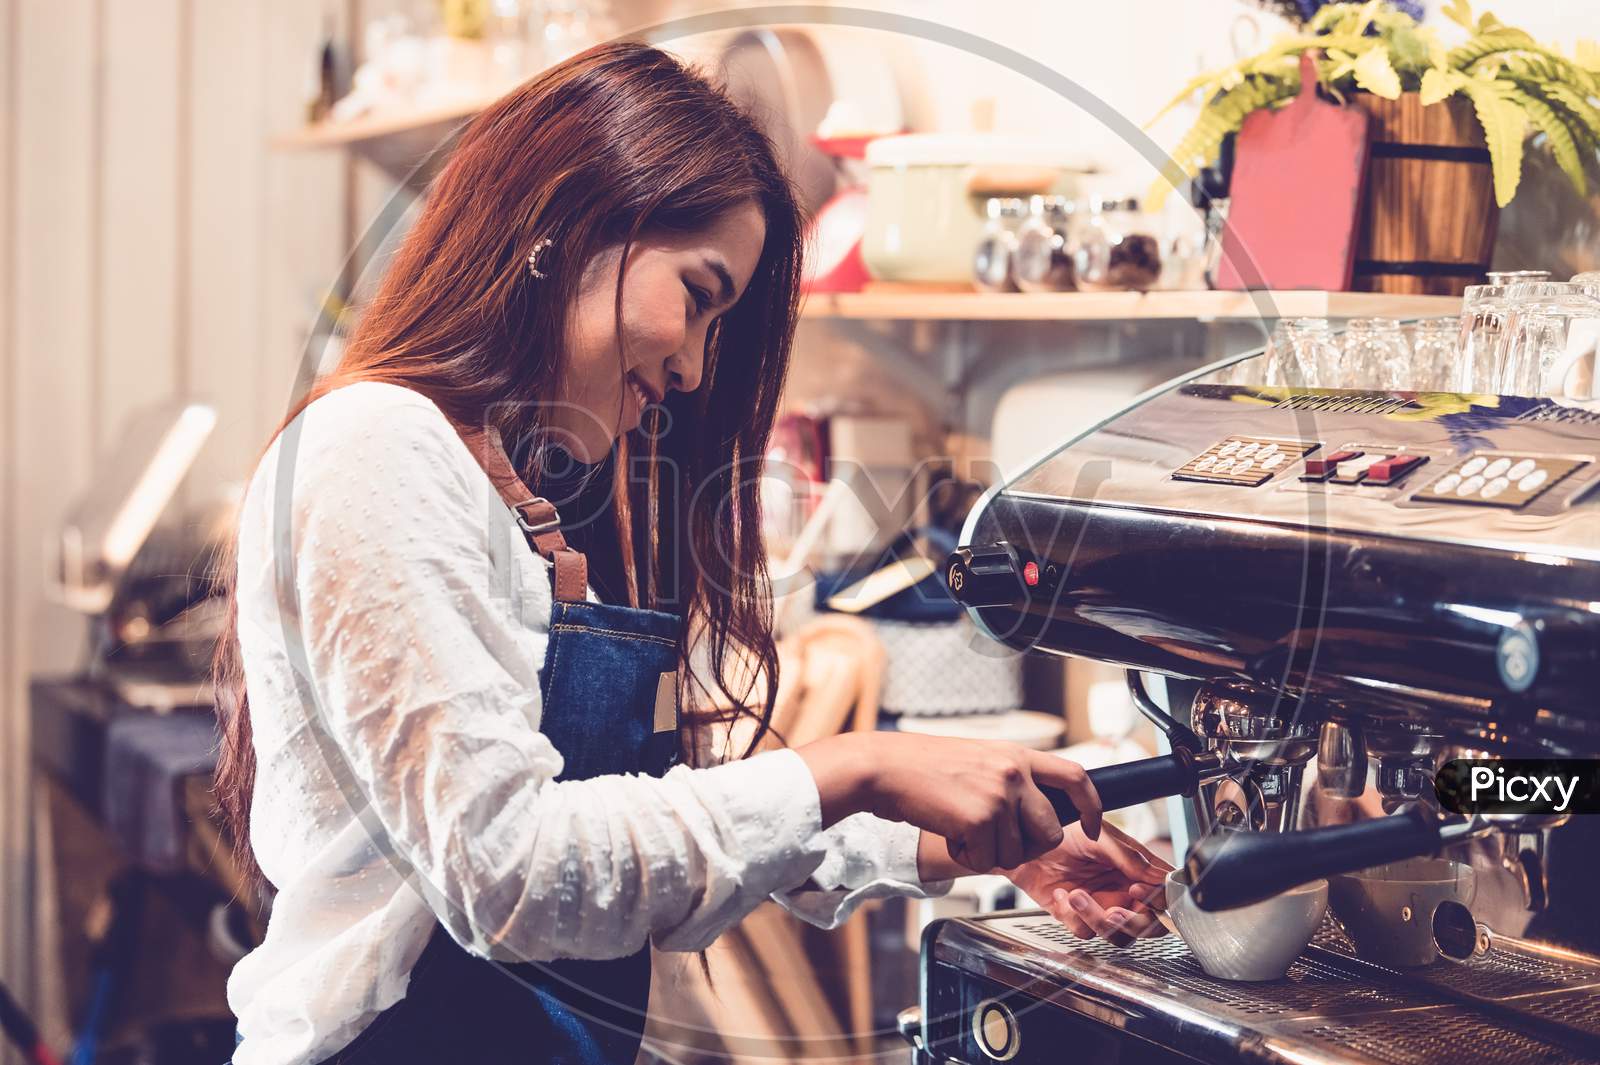 Professional Female Barista Hand Making Cup Of Coffee With Coffee Maker Machine In Restaurant Pub Or Coffee Shop. People And Lifestyles. Business Food And Drink Concept.  Happy Shop Owner Entrepreneur